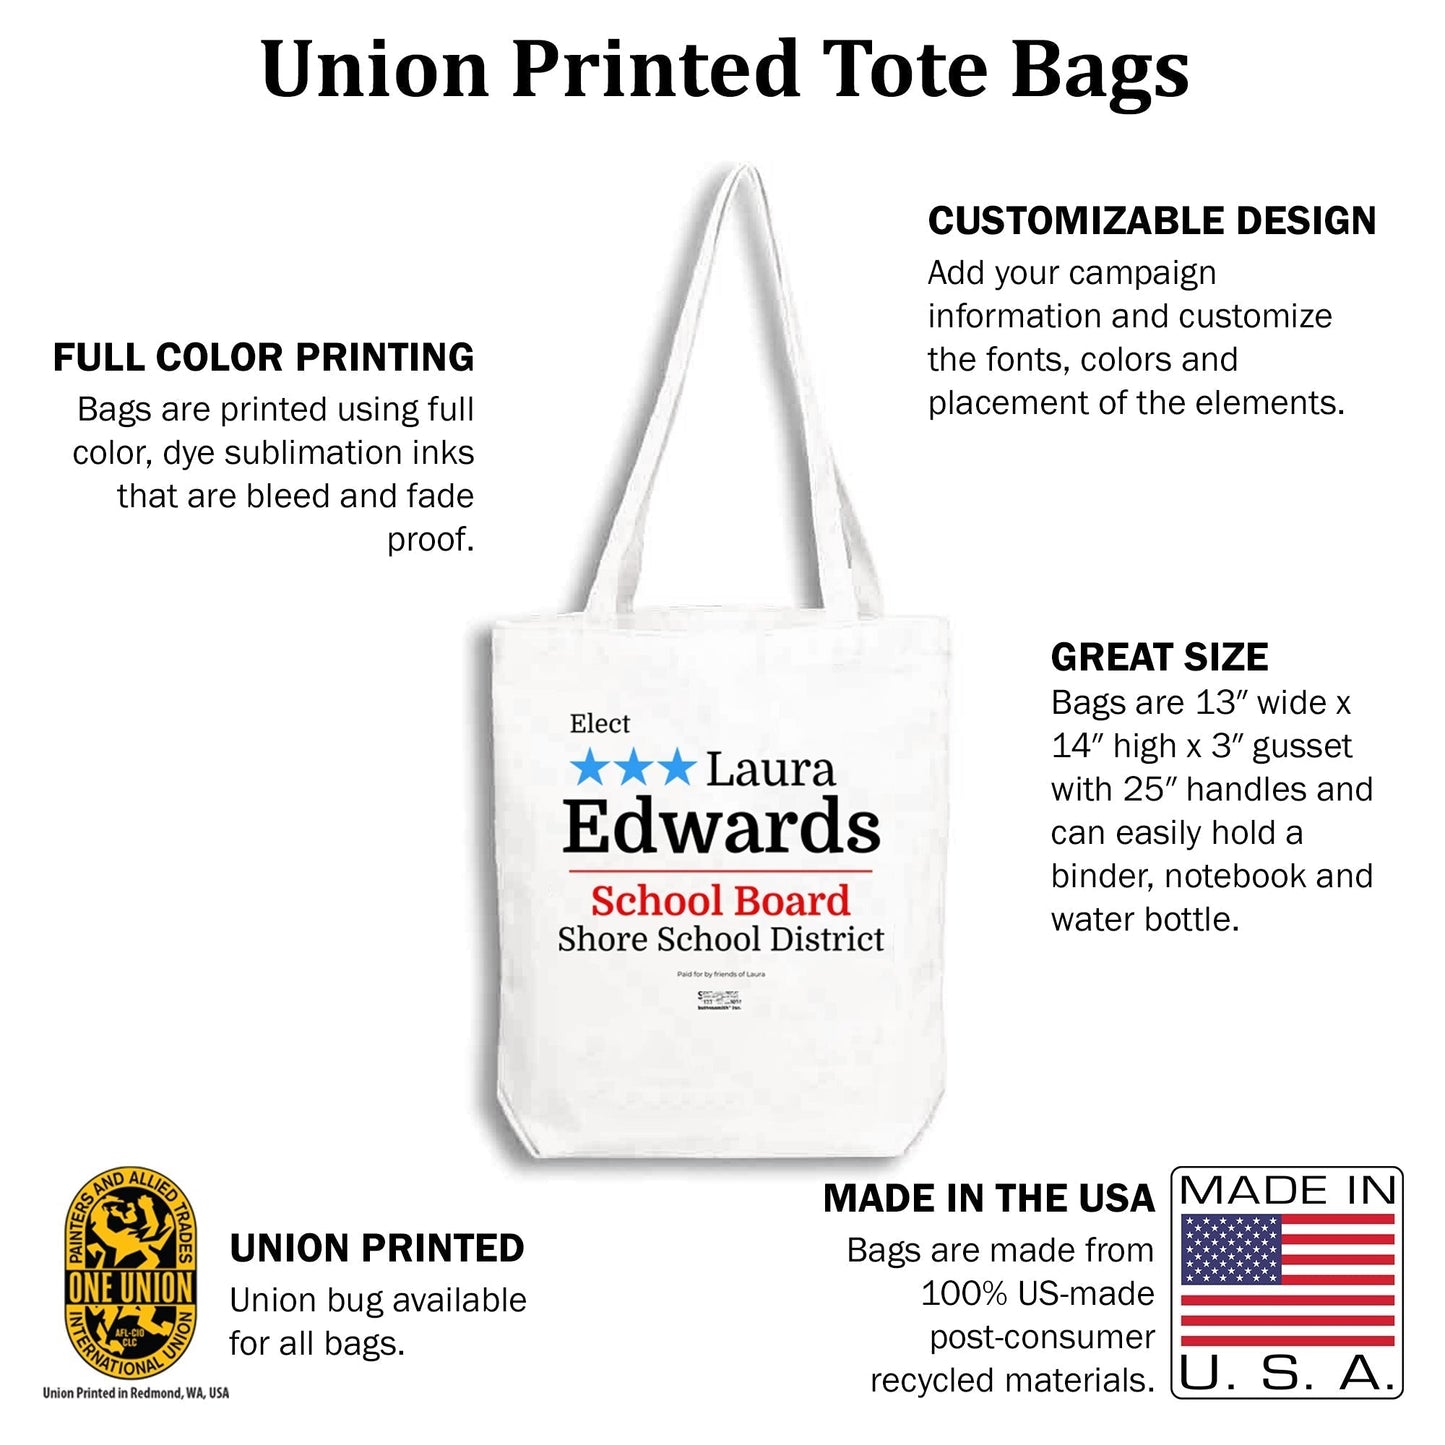 MerchBlue Union-Printed Tote Bag - DemParty design - Made in the USA from recycled fabric